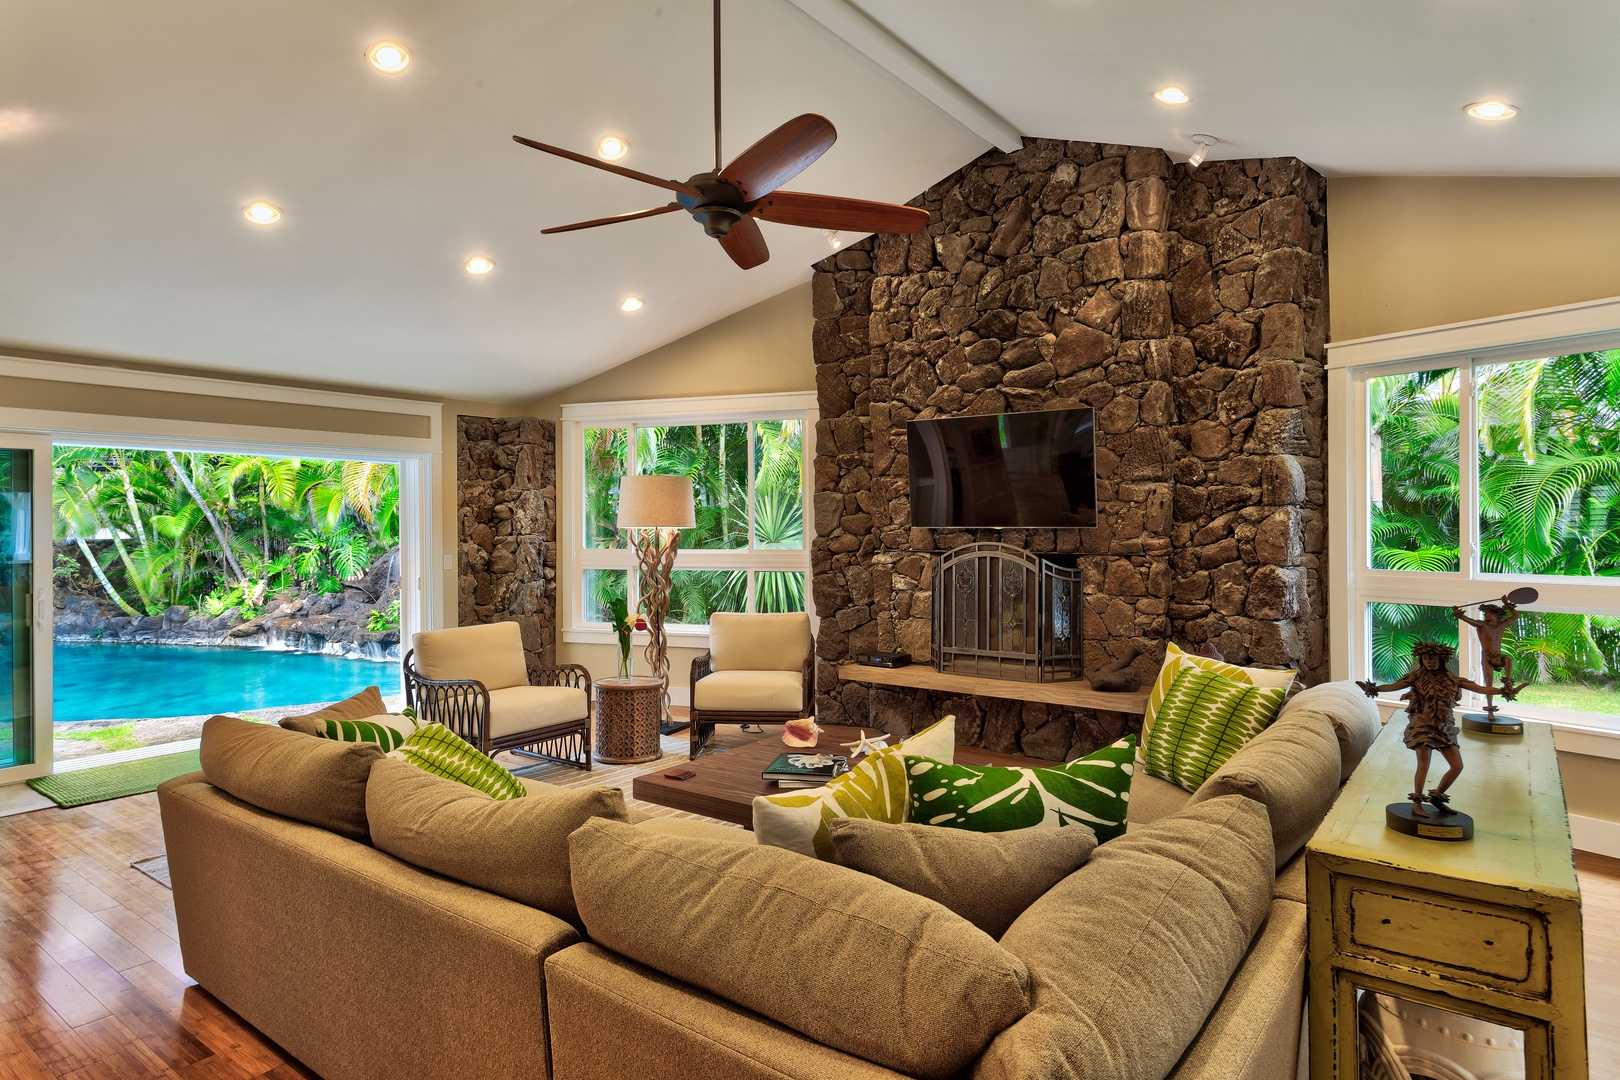 Kailua Vacation Rentals, Maluhia - Complete with vaulted ceilings, a stone fireplace, and elegant travertine and wood flooring, Maluhia’s expansive common areas and open flow provide a setting of relaxed luxury for your group’s vacation